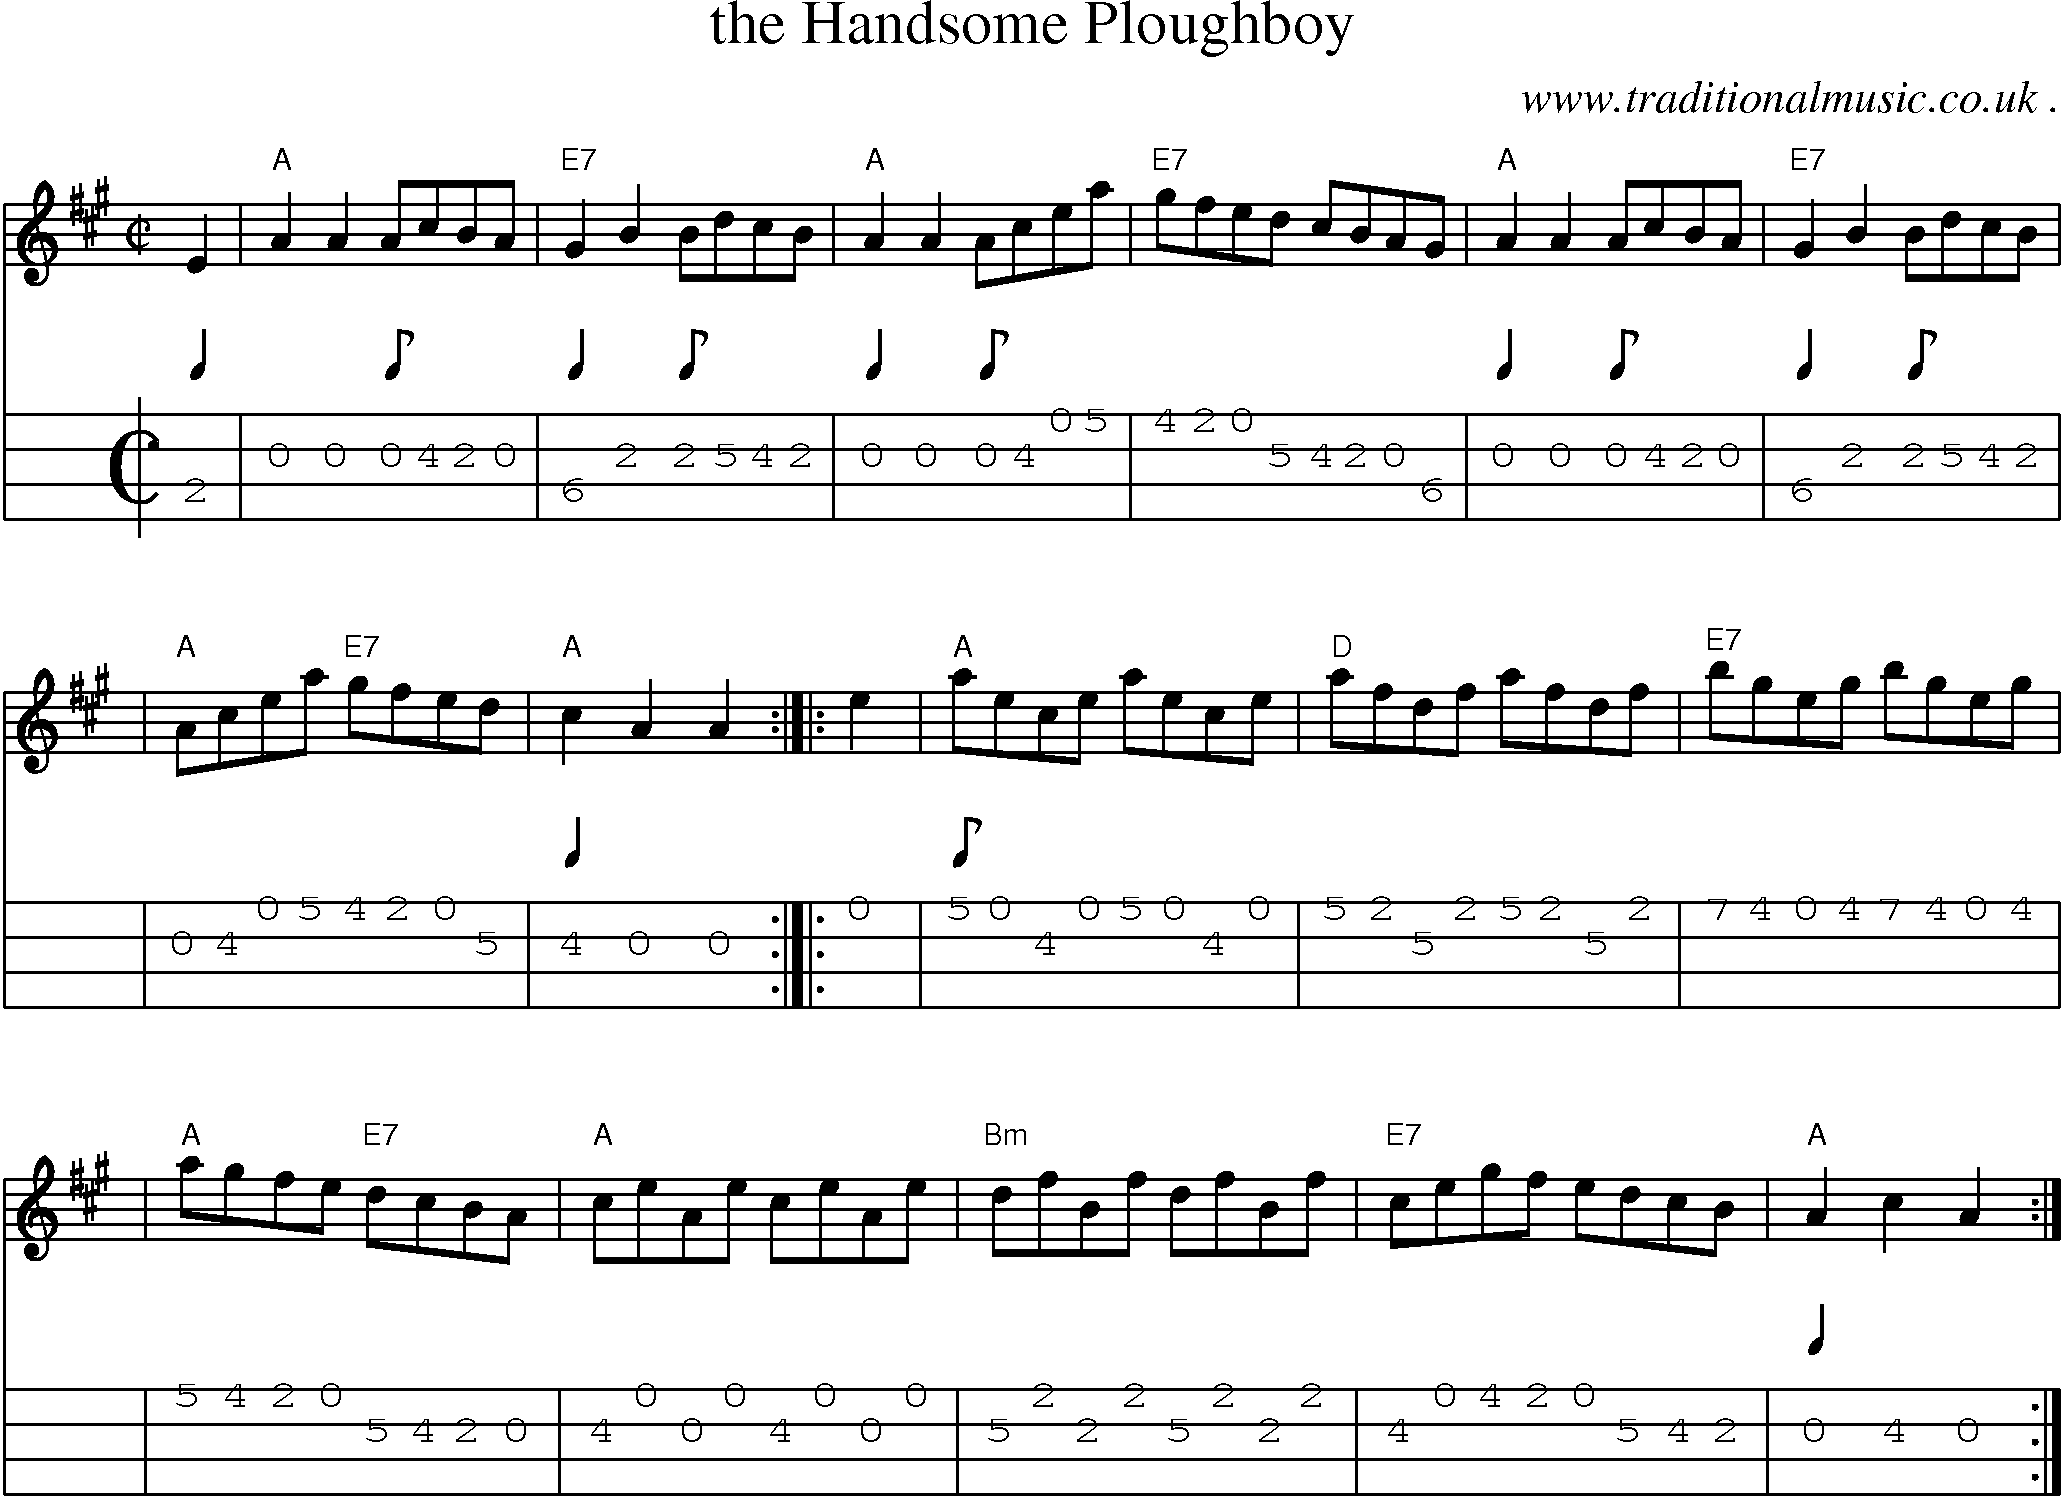 Sheet-music  score, Chords and Mandolin Tabs for The Handsome Ploughboy